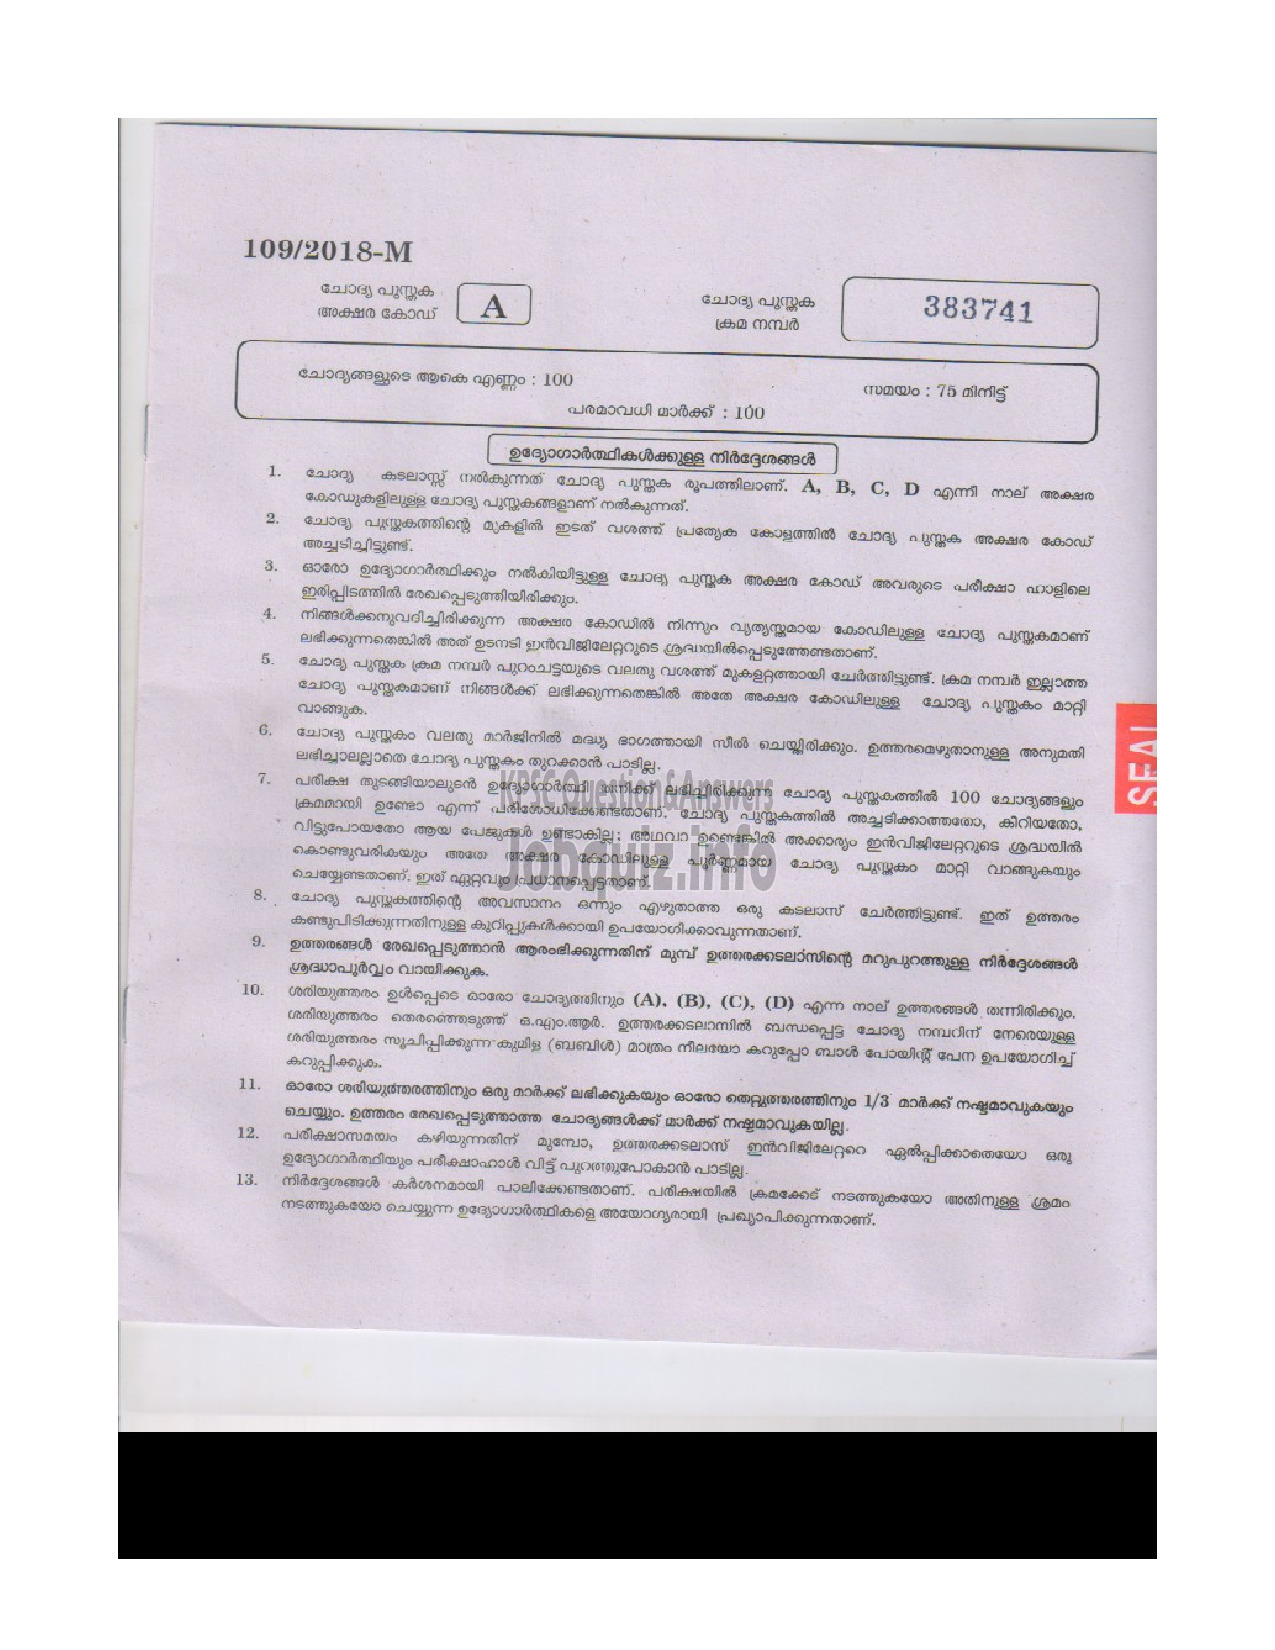 Kerala PSC Question Paper - ATTENDER GR II LIGHT KEEPER SIGNALLER CLERICAL ATTENDER FEMALE ASSISTANT PRISON OFFICER LAB ATTENDER HOMOEOPATHY Malayalam/English -1